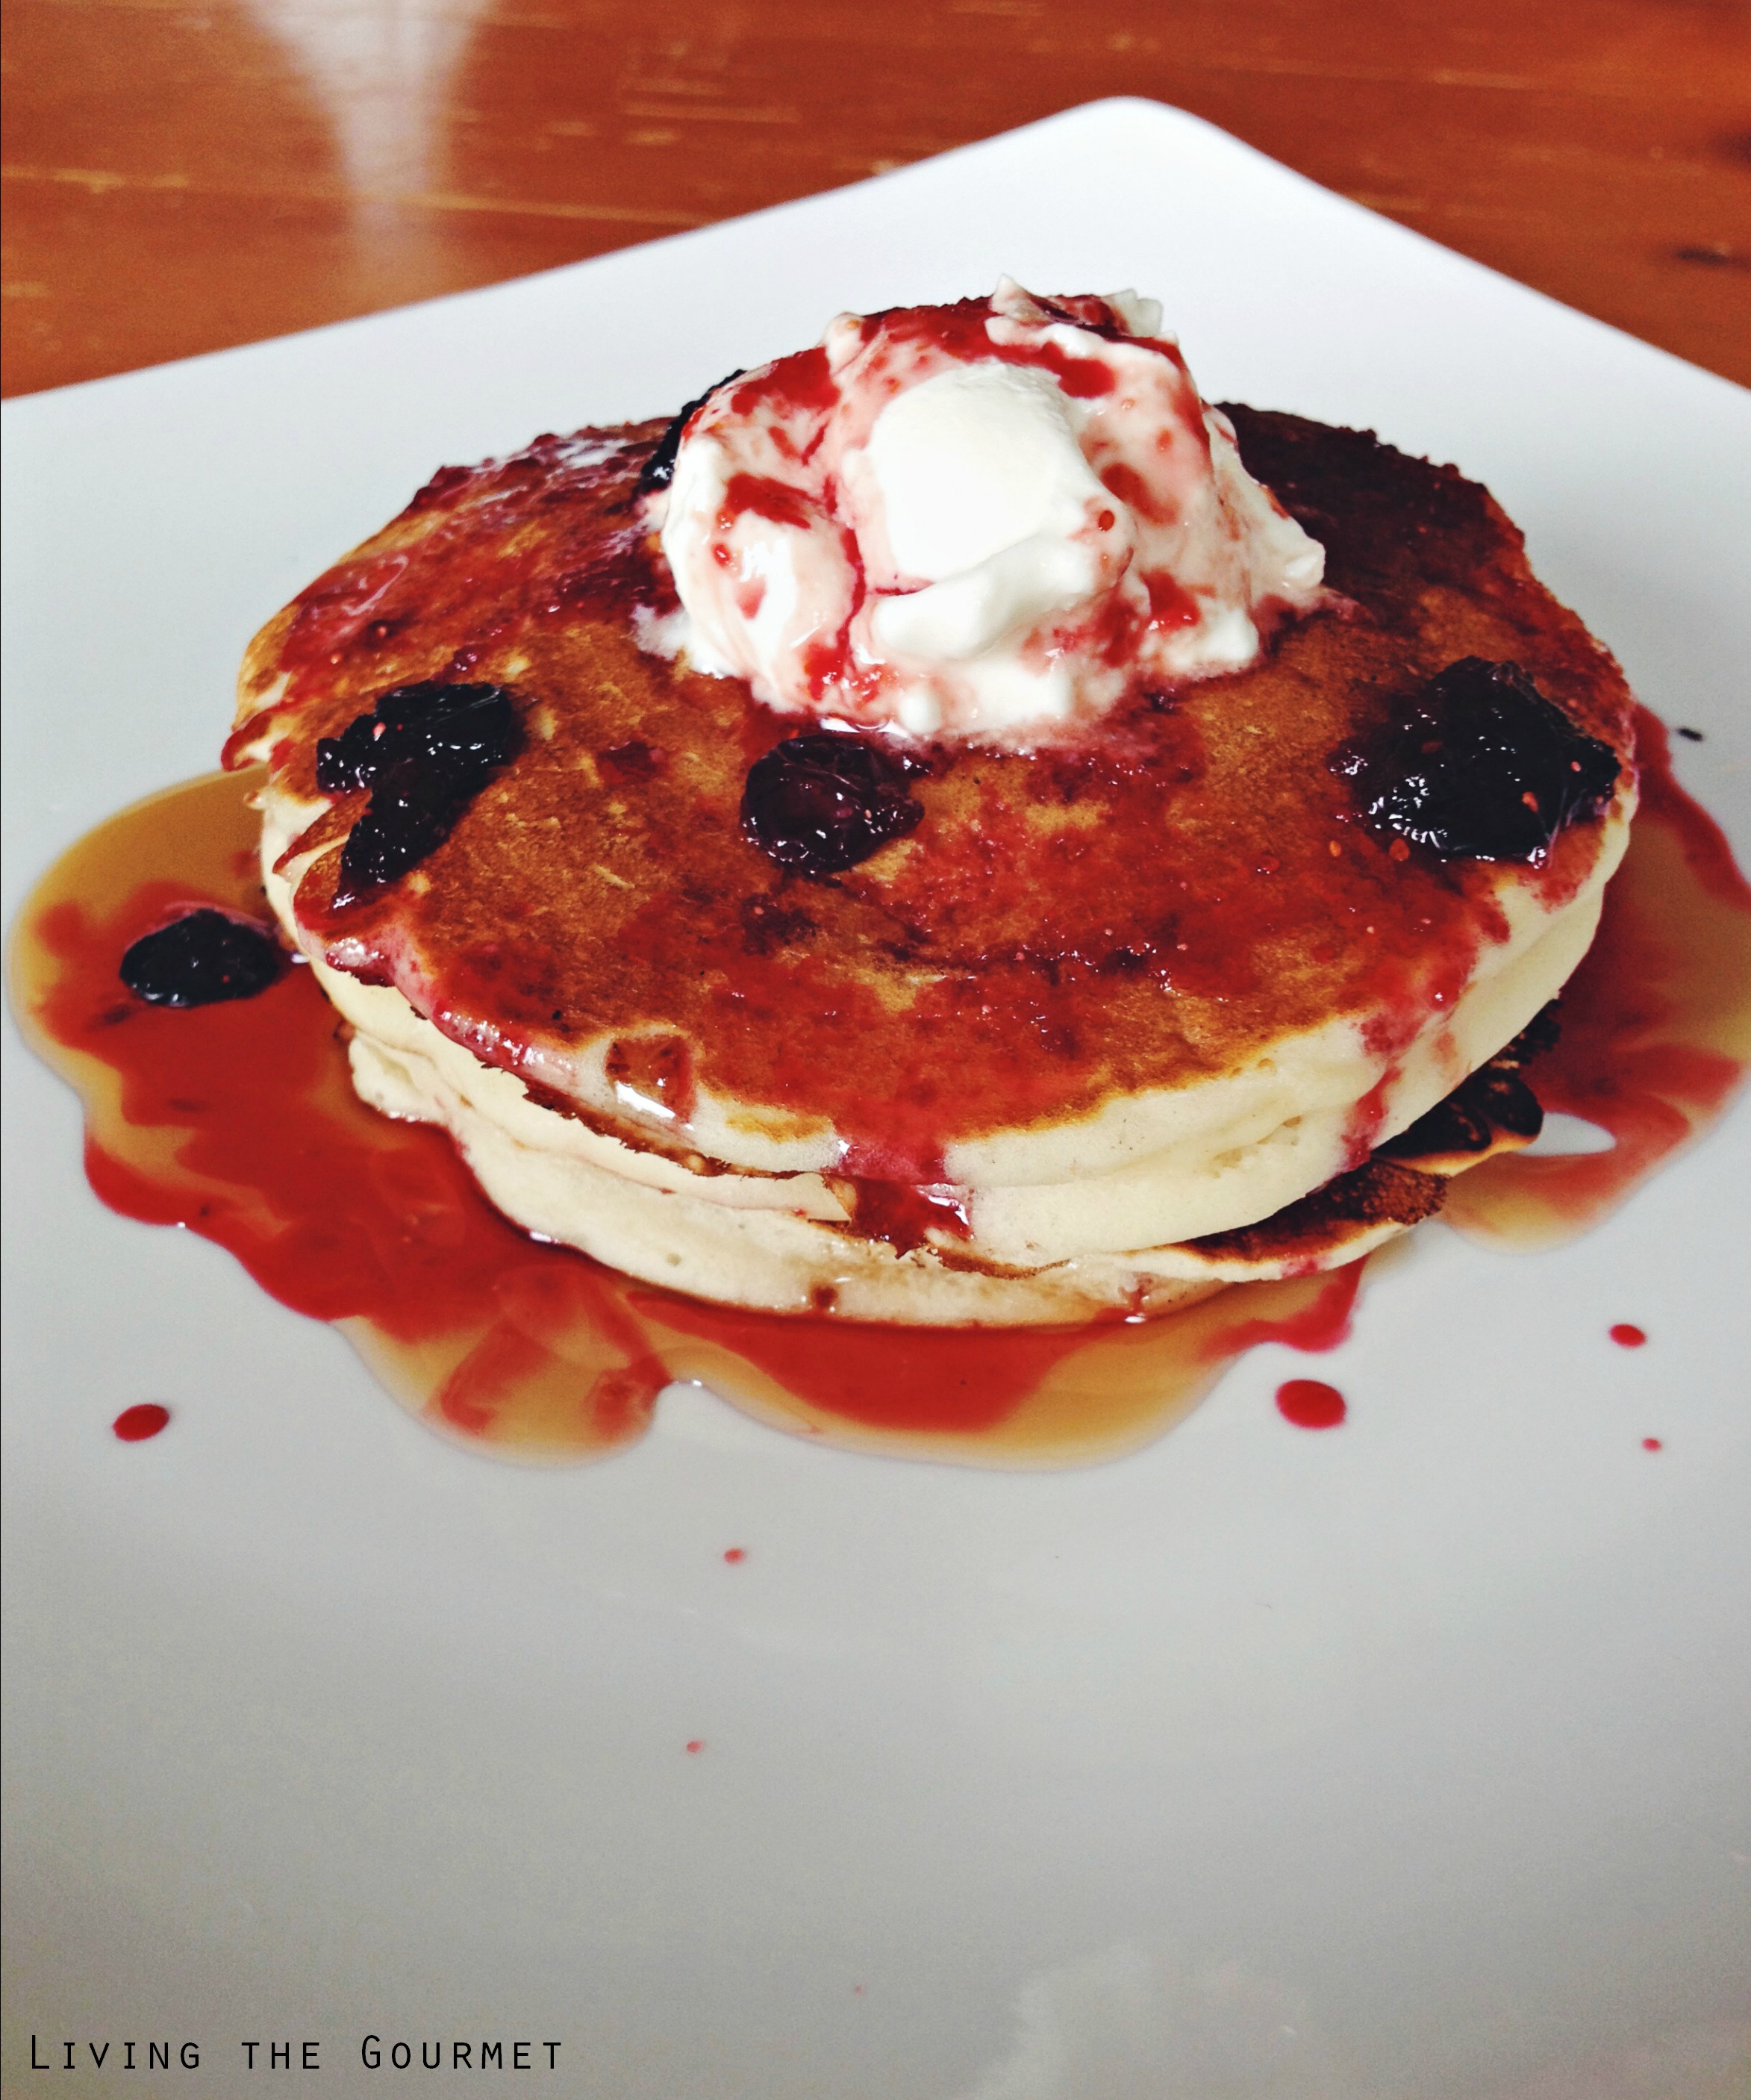 Living the Gourmet: Pancakes with Blueberry Ginger Sauce